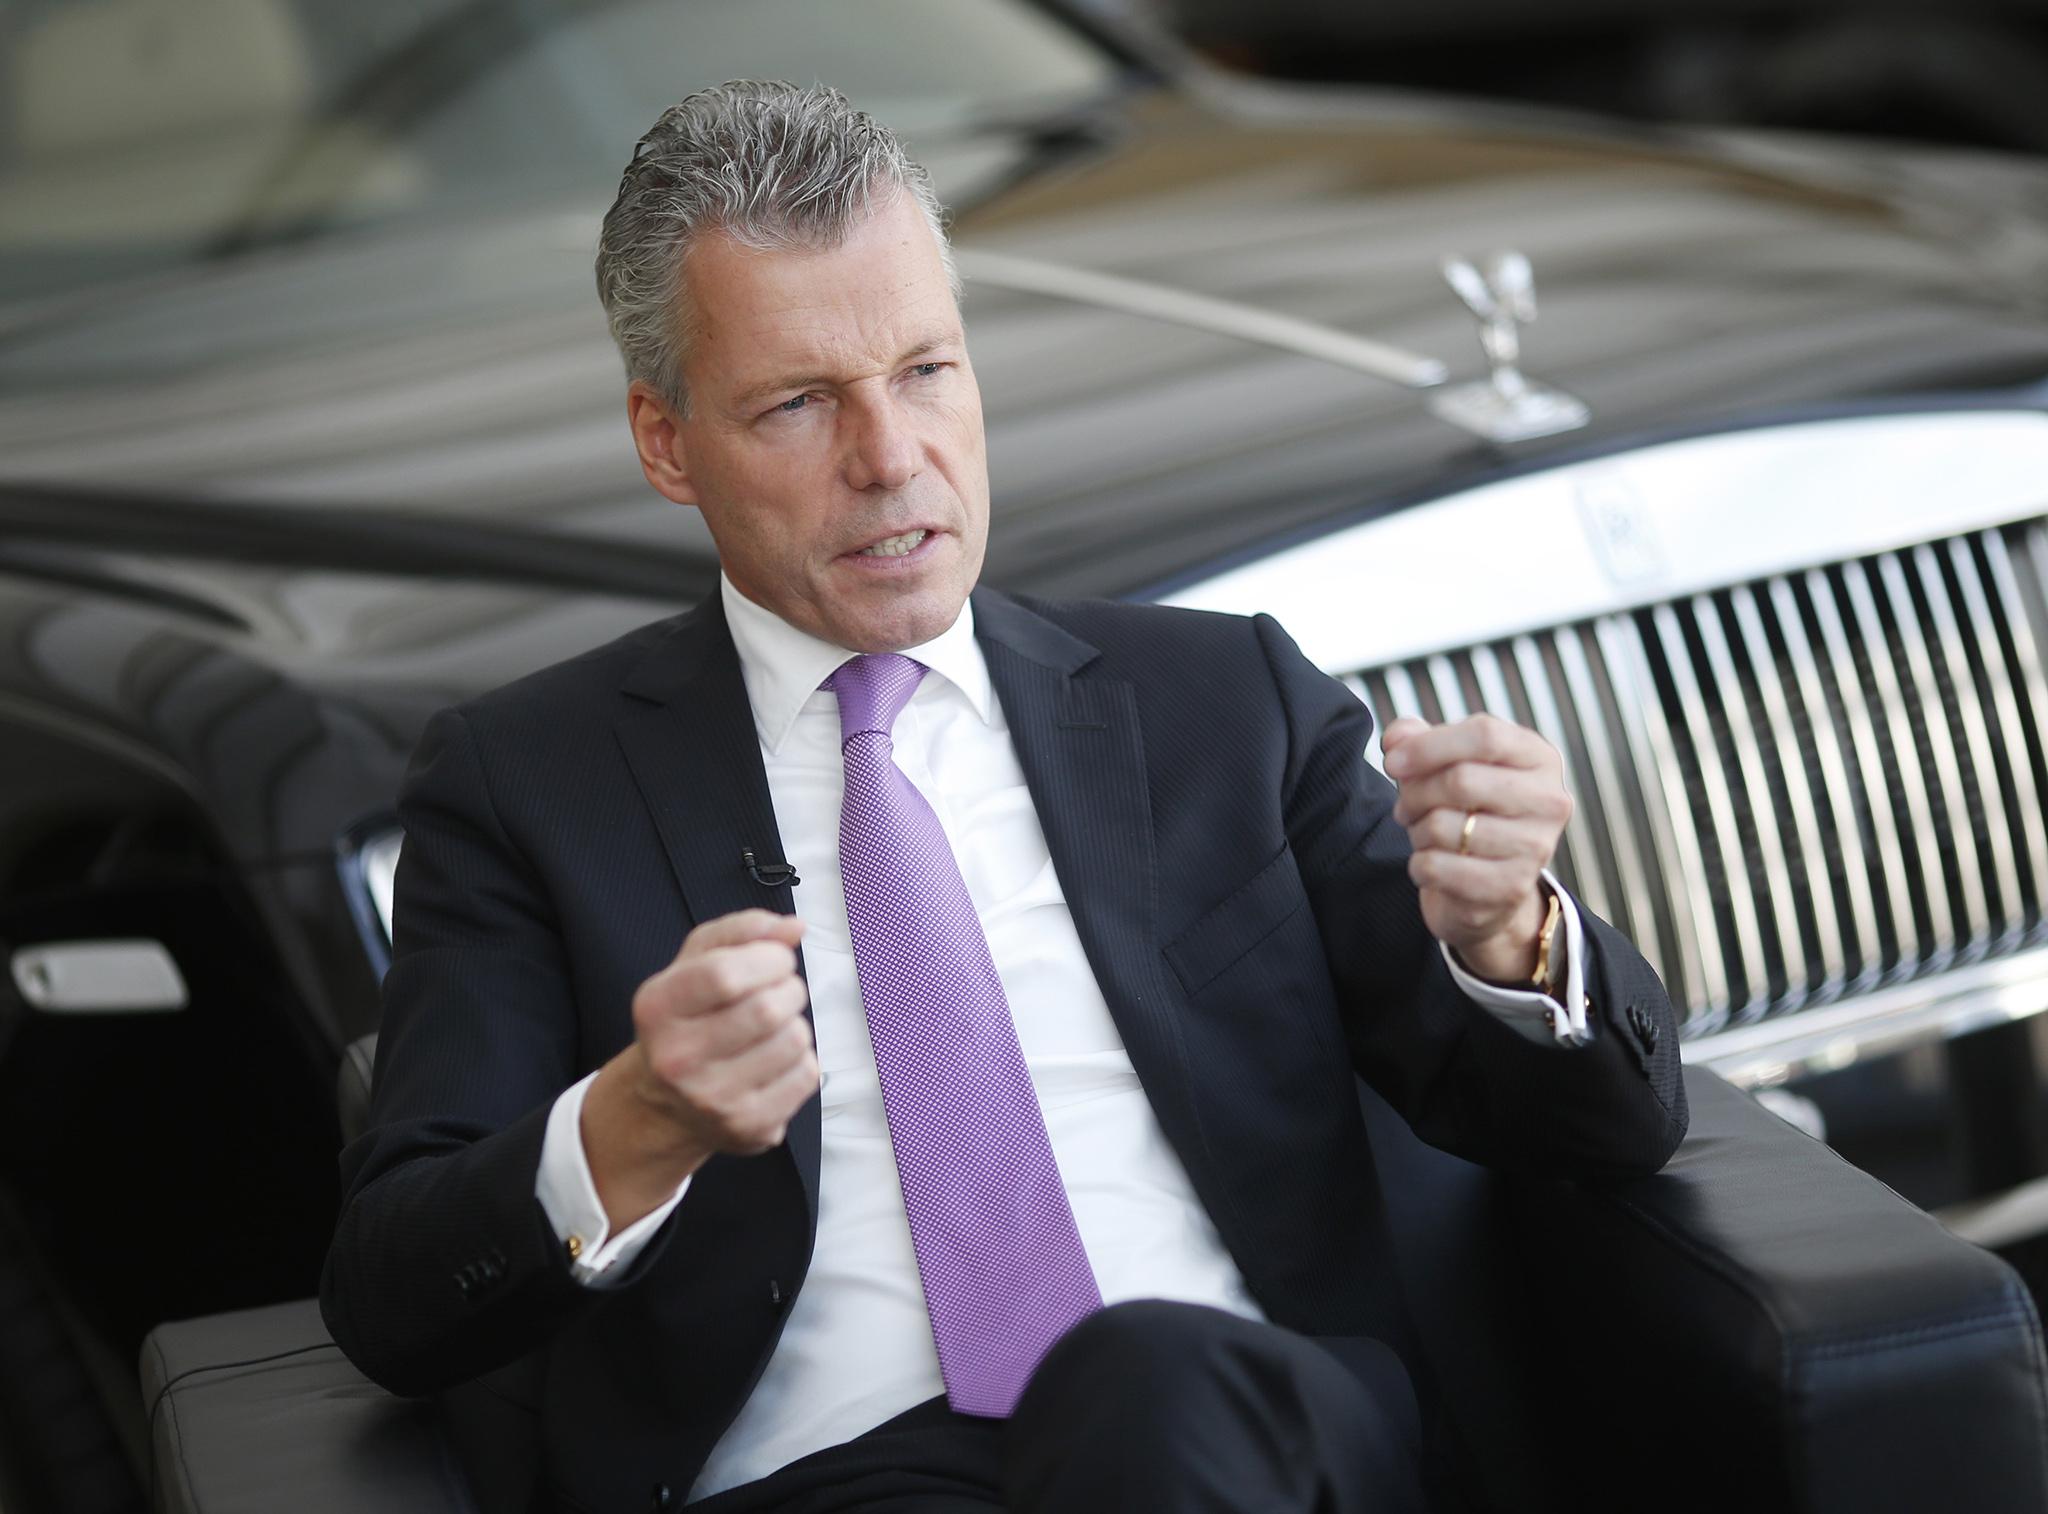 The man behind the new Rolls-Royce eighth generation of the Phantom